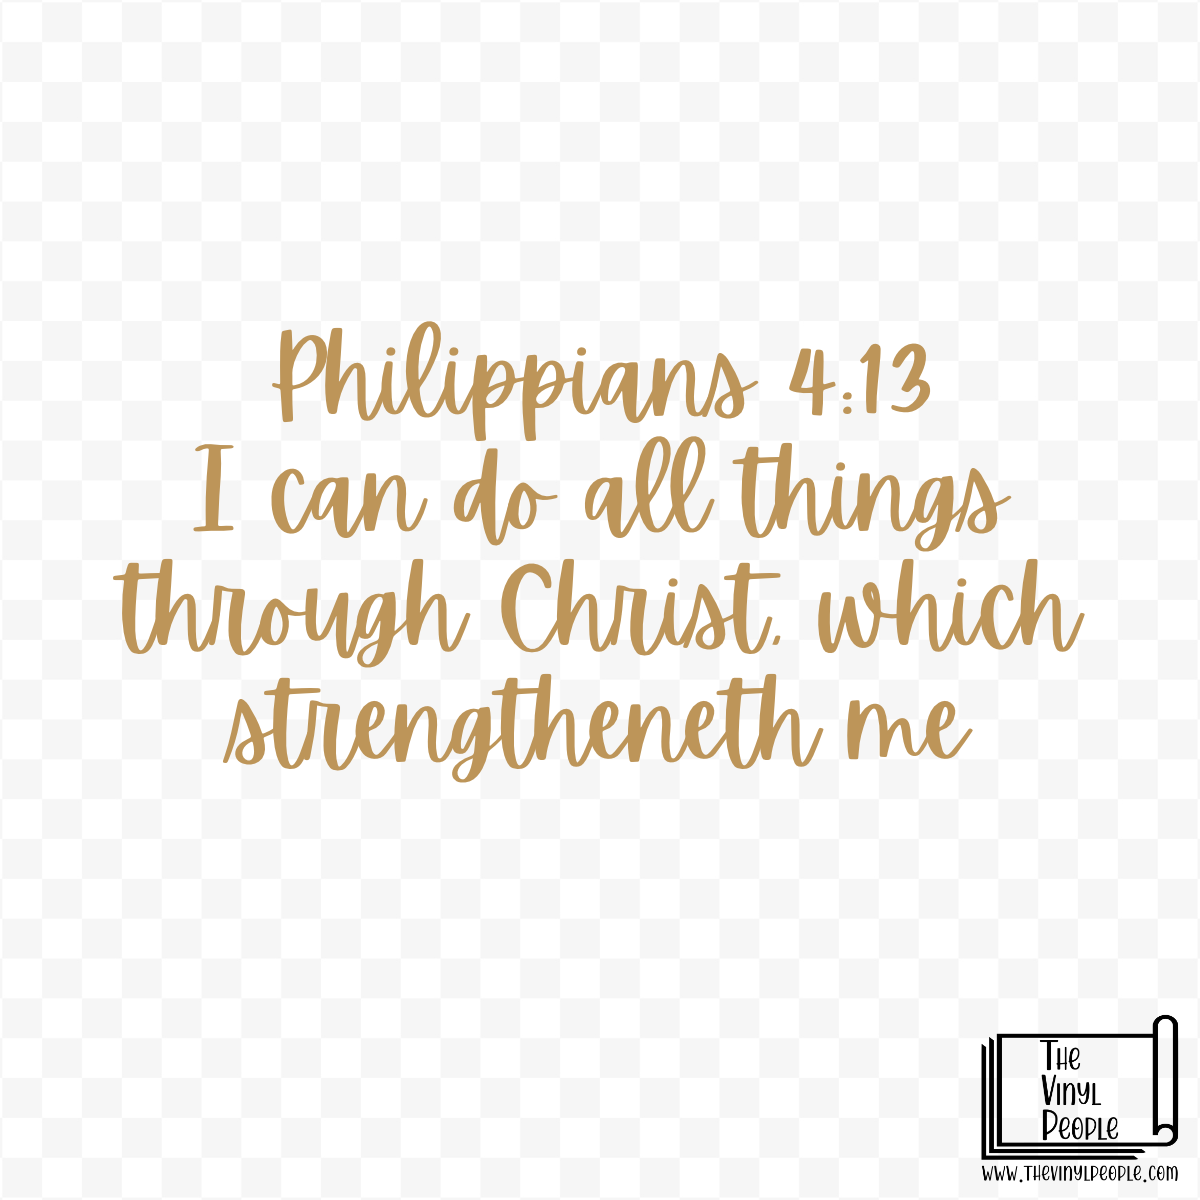 Custom Decal for Brittany - Philippians 4:13 (gold)